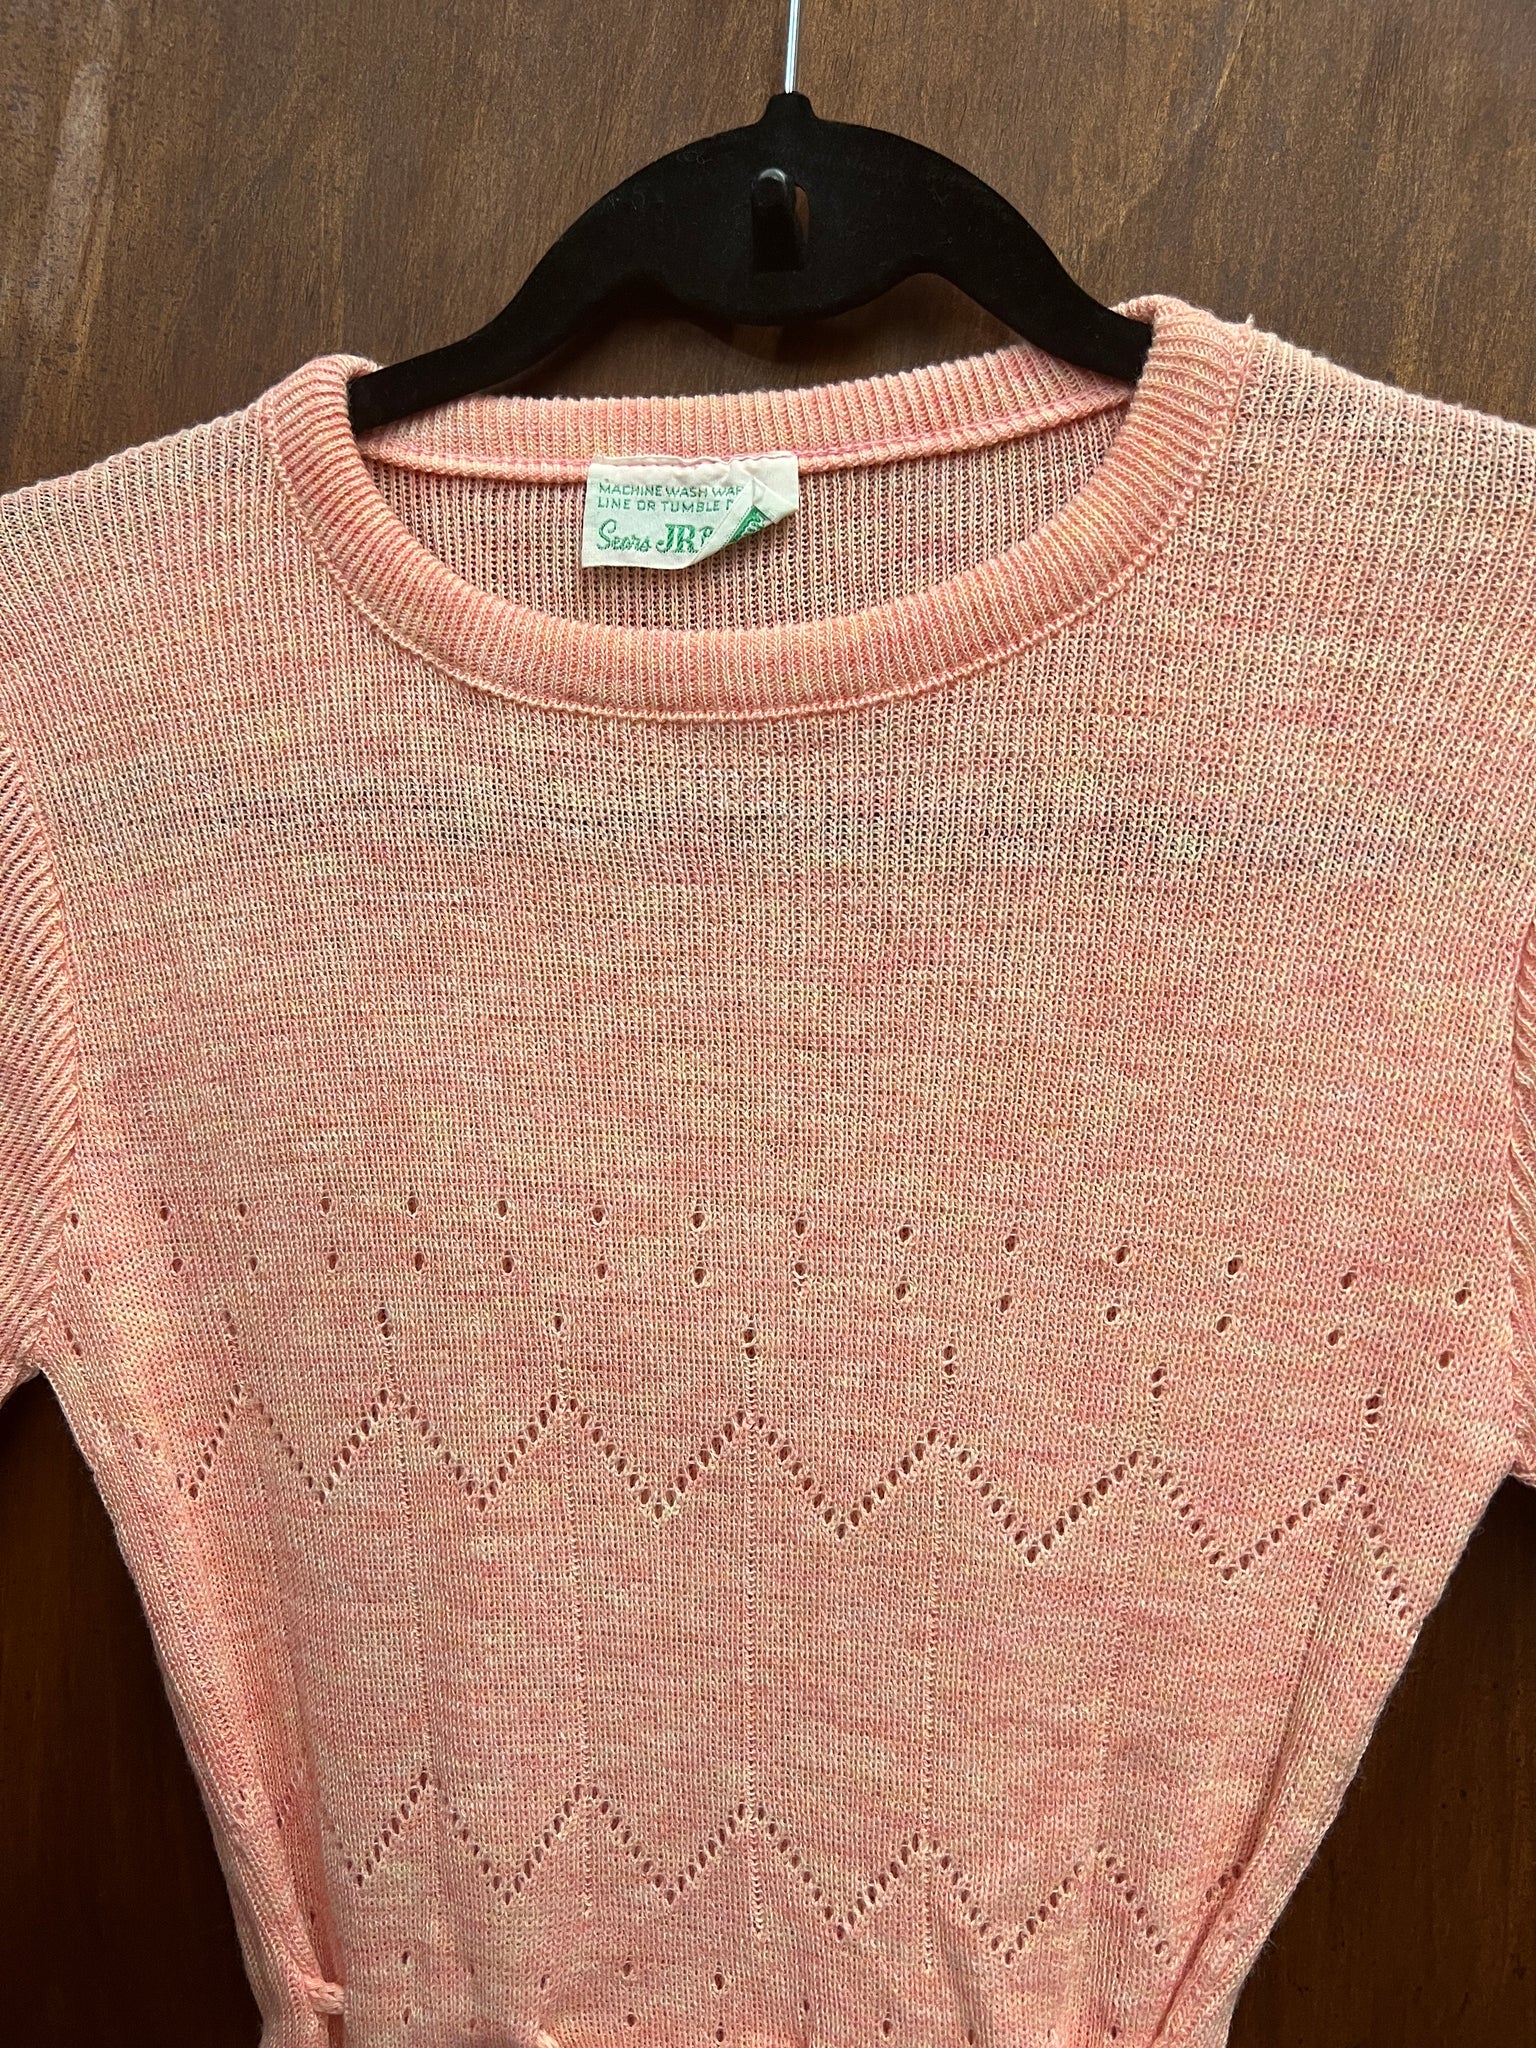 1970s-SWEATER- Sears Jr light pink s/s belted